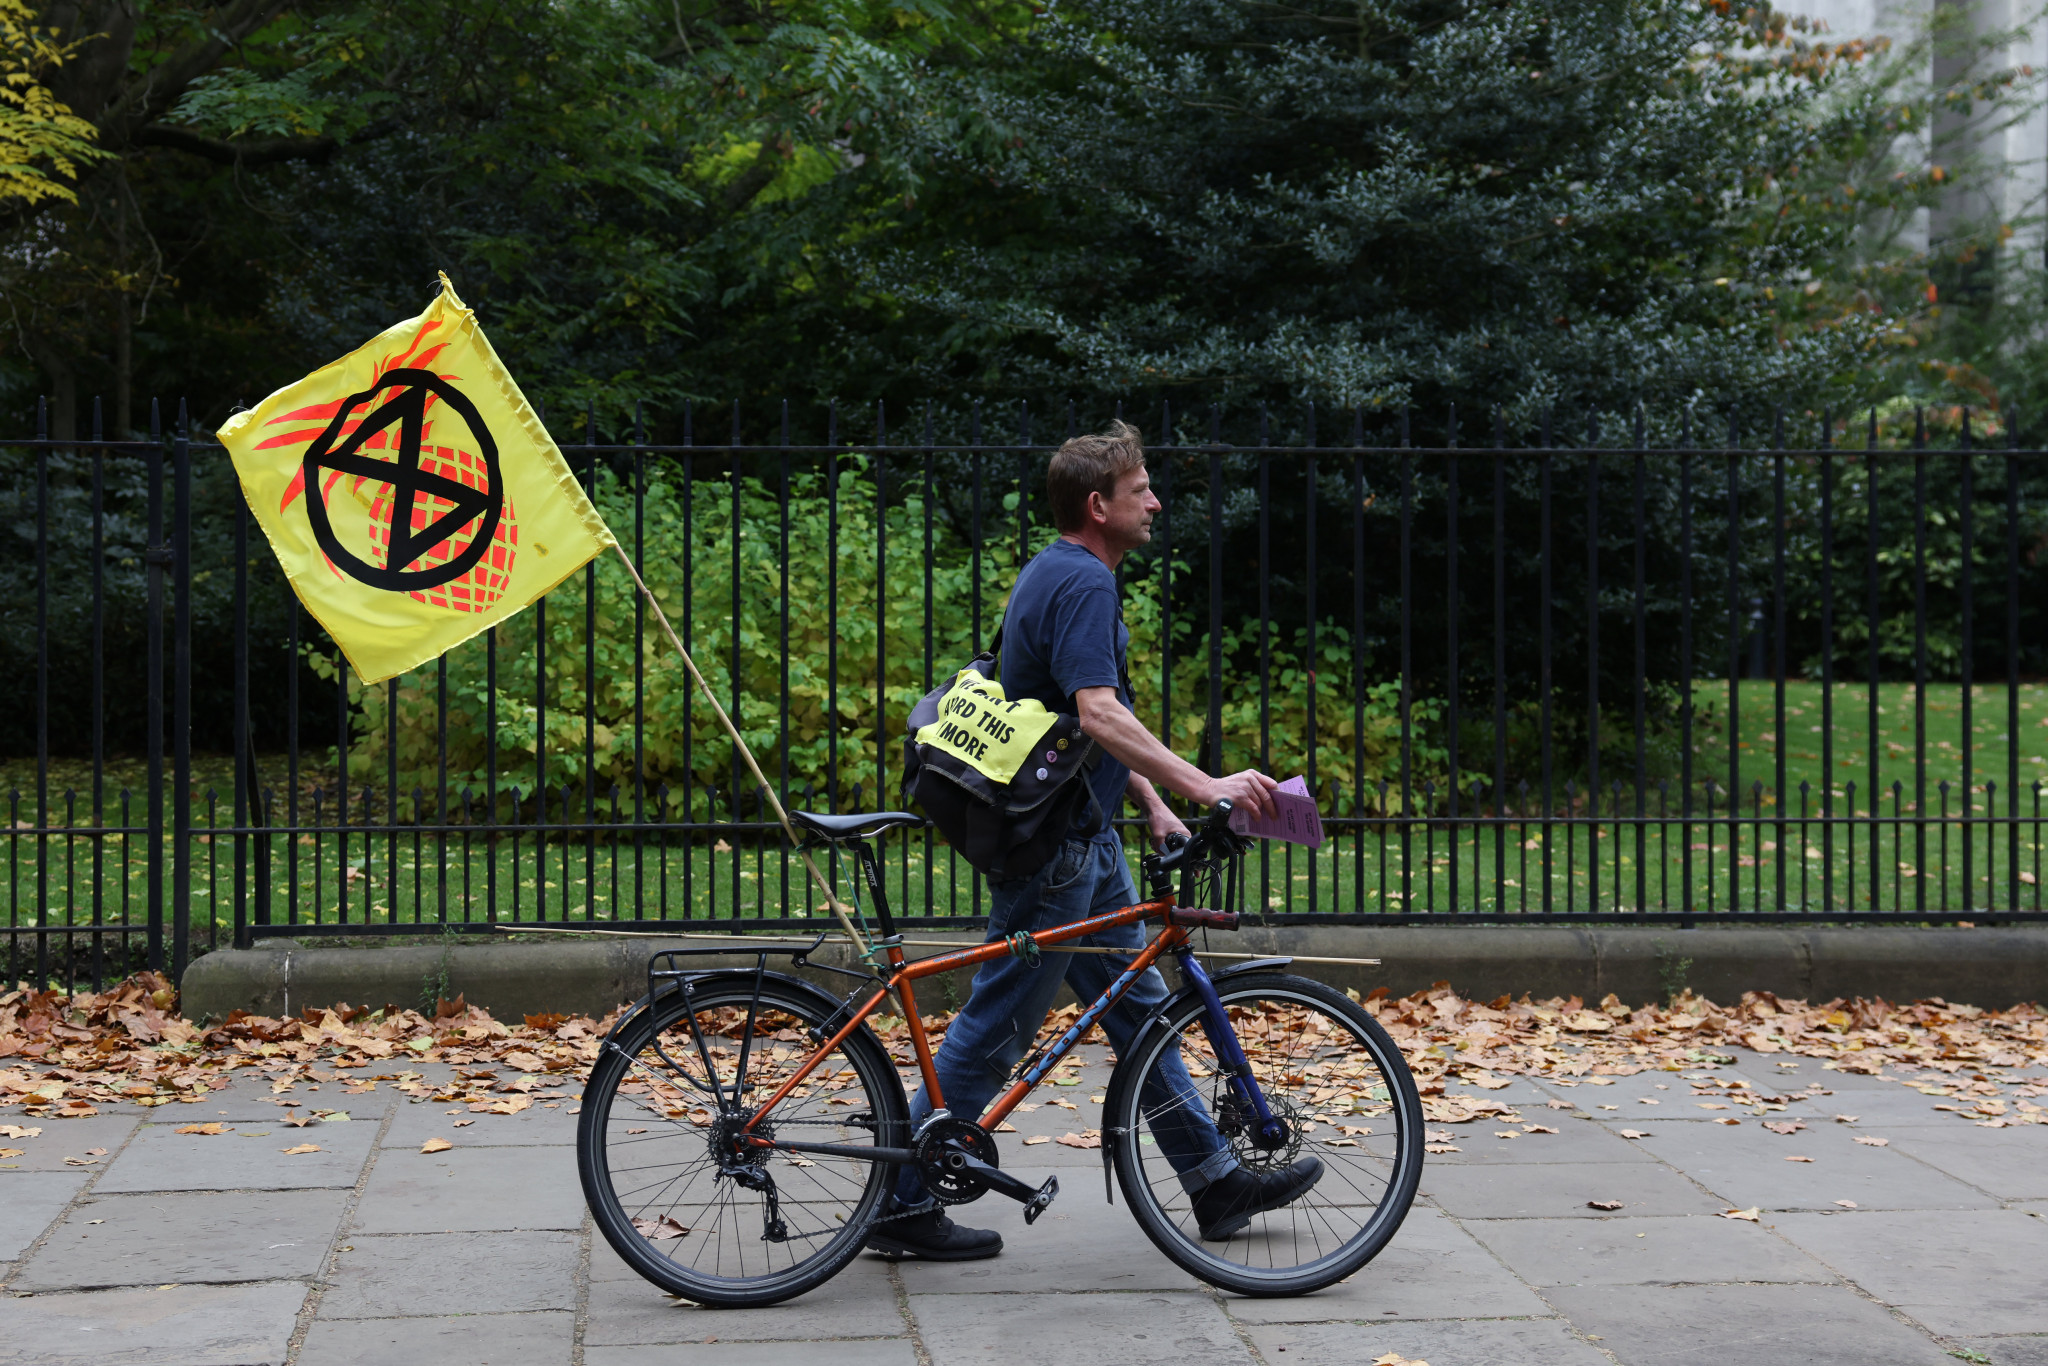 Extinction Rebellion has caused unrest in the United Kingdom due to its environmental protests ©Getty Images